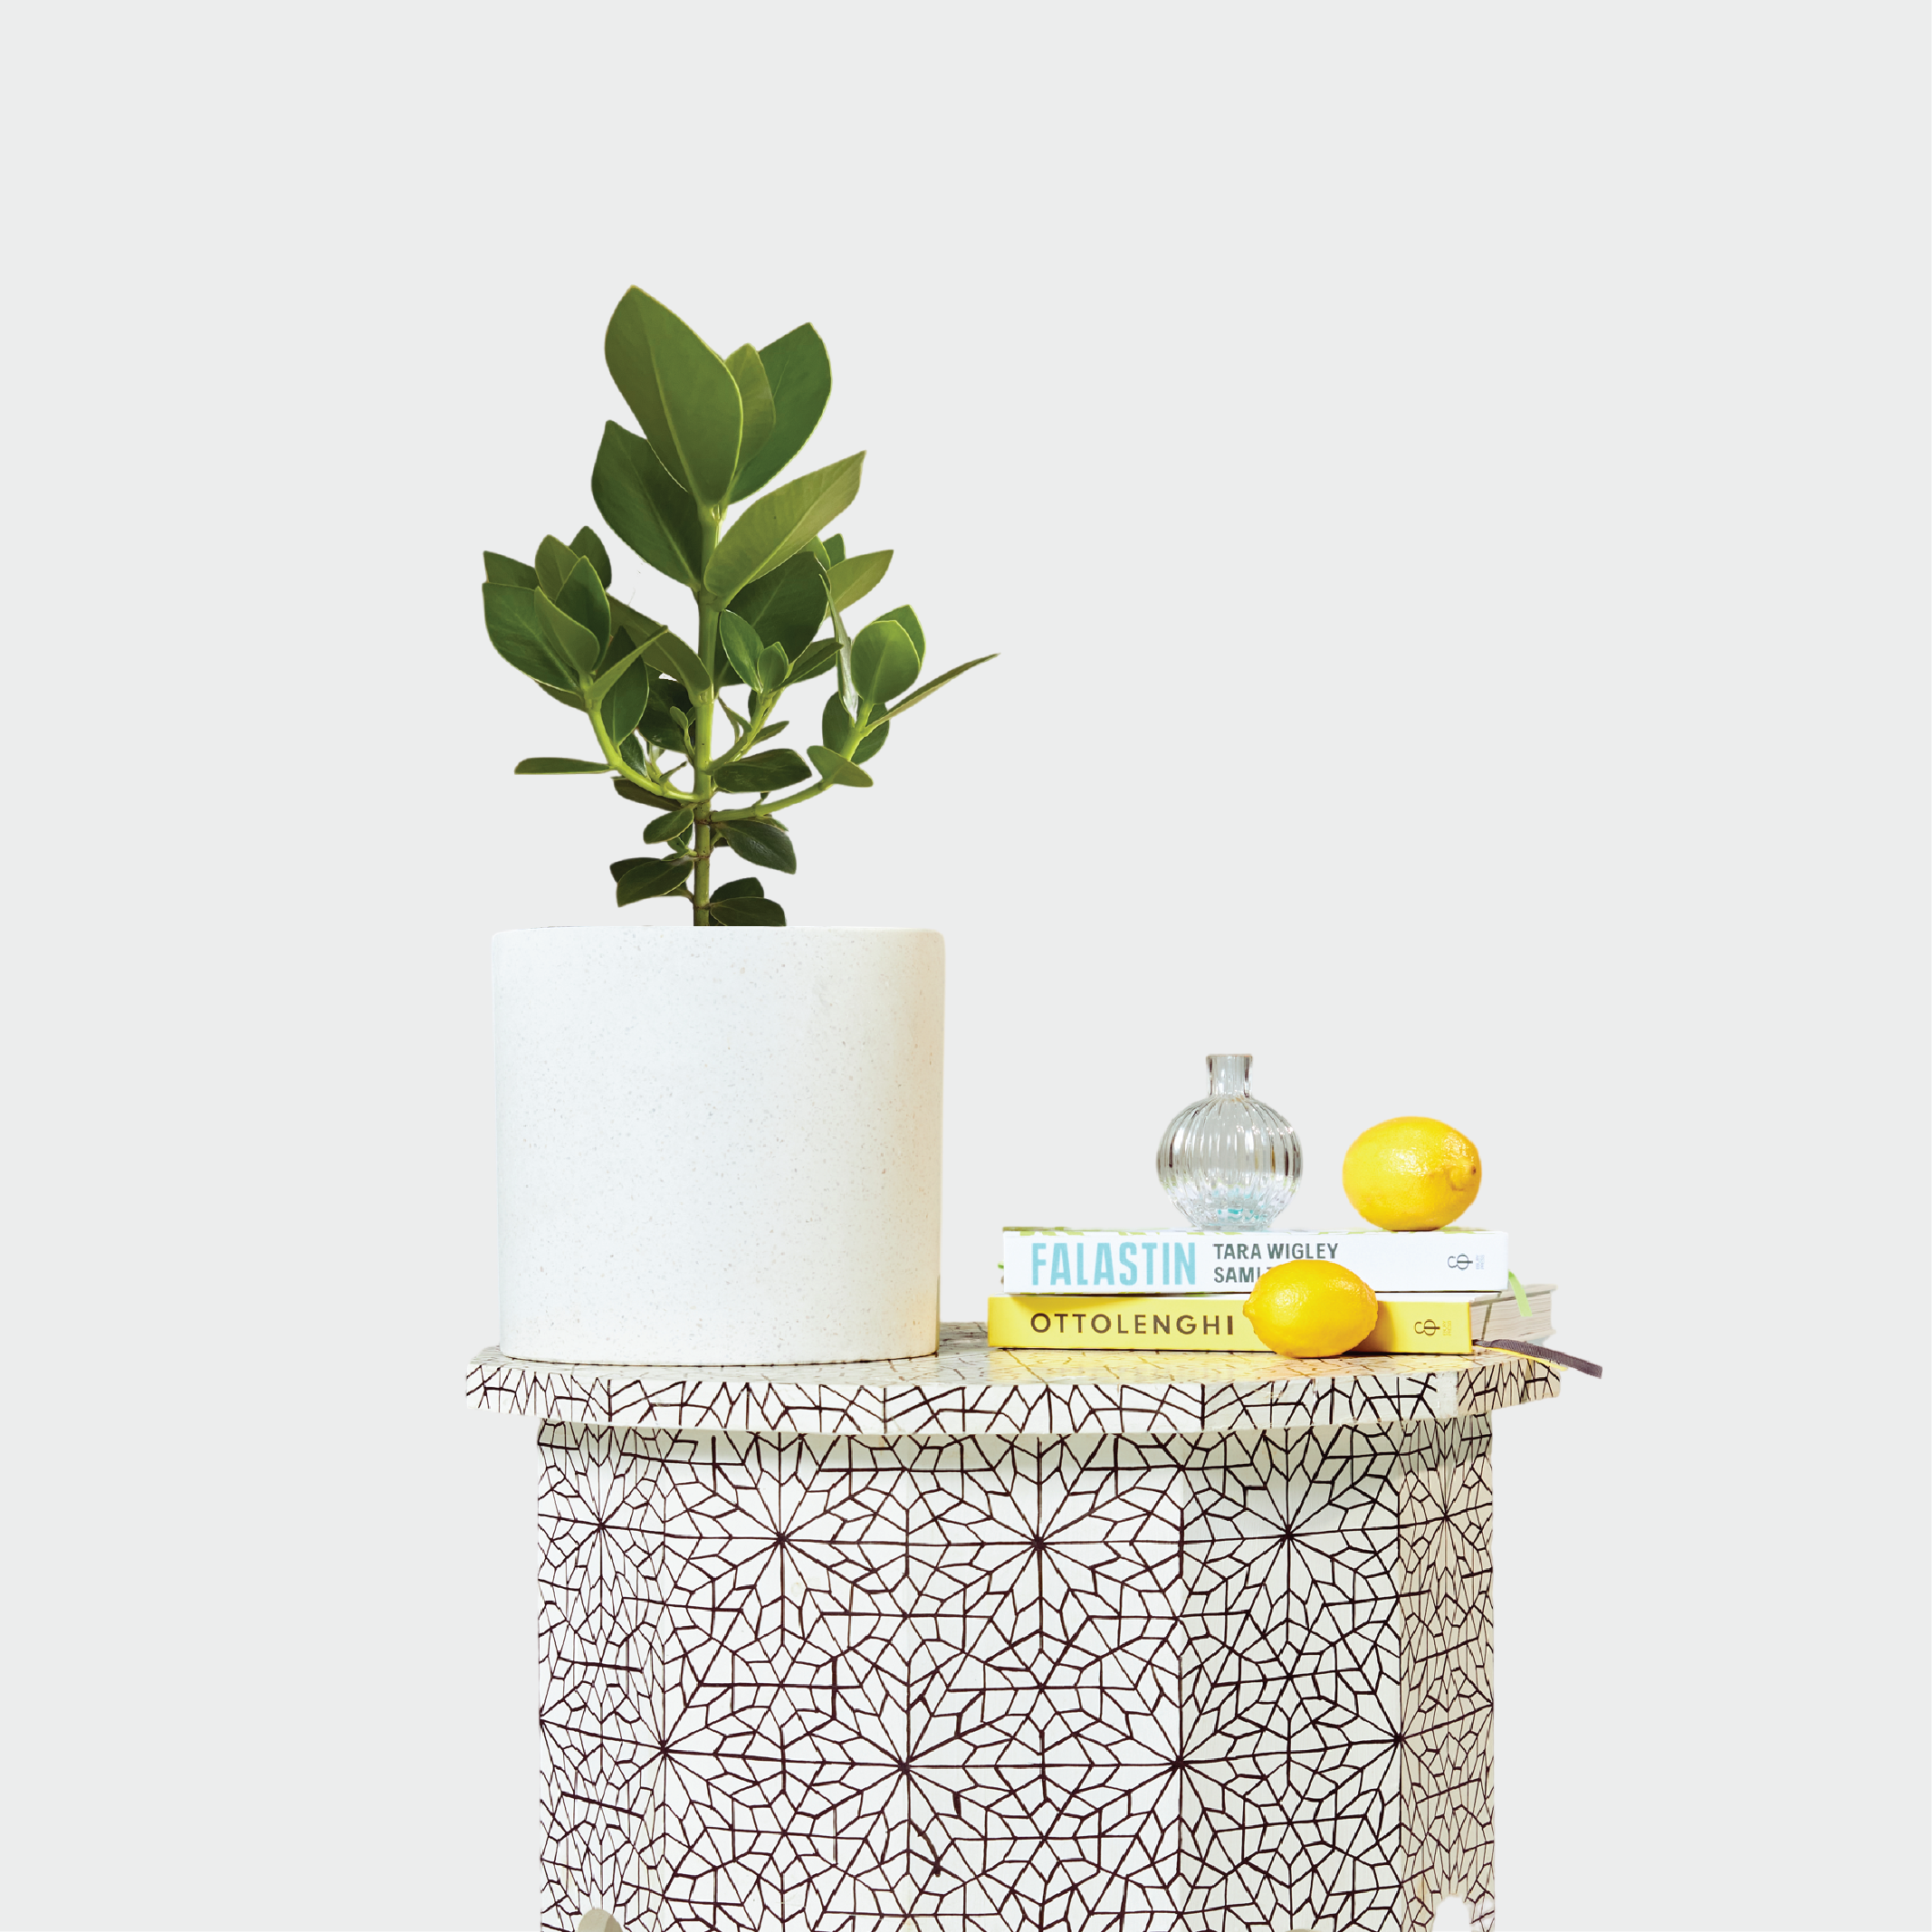 Autograph Tree nestled in a White Pot on a Morocco Table with accessories at The Good Plant Co